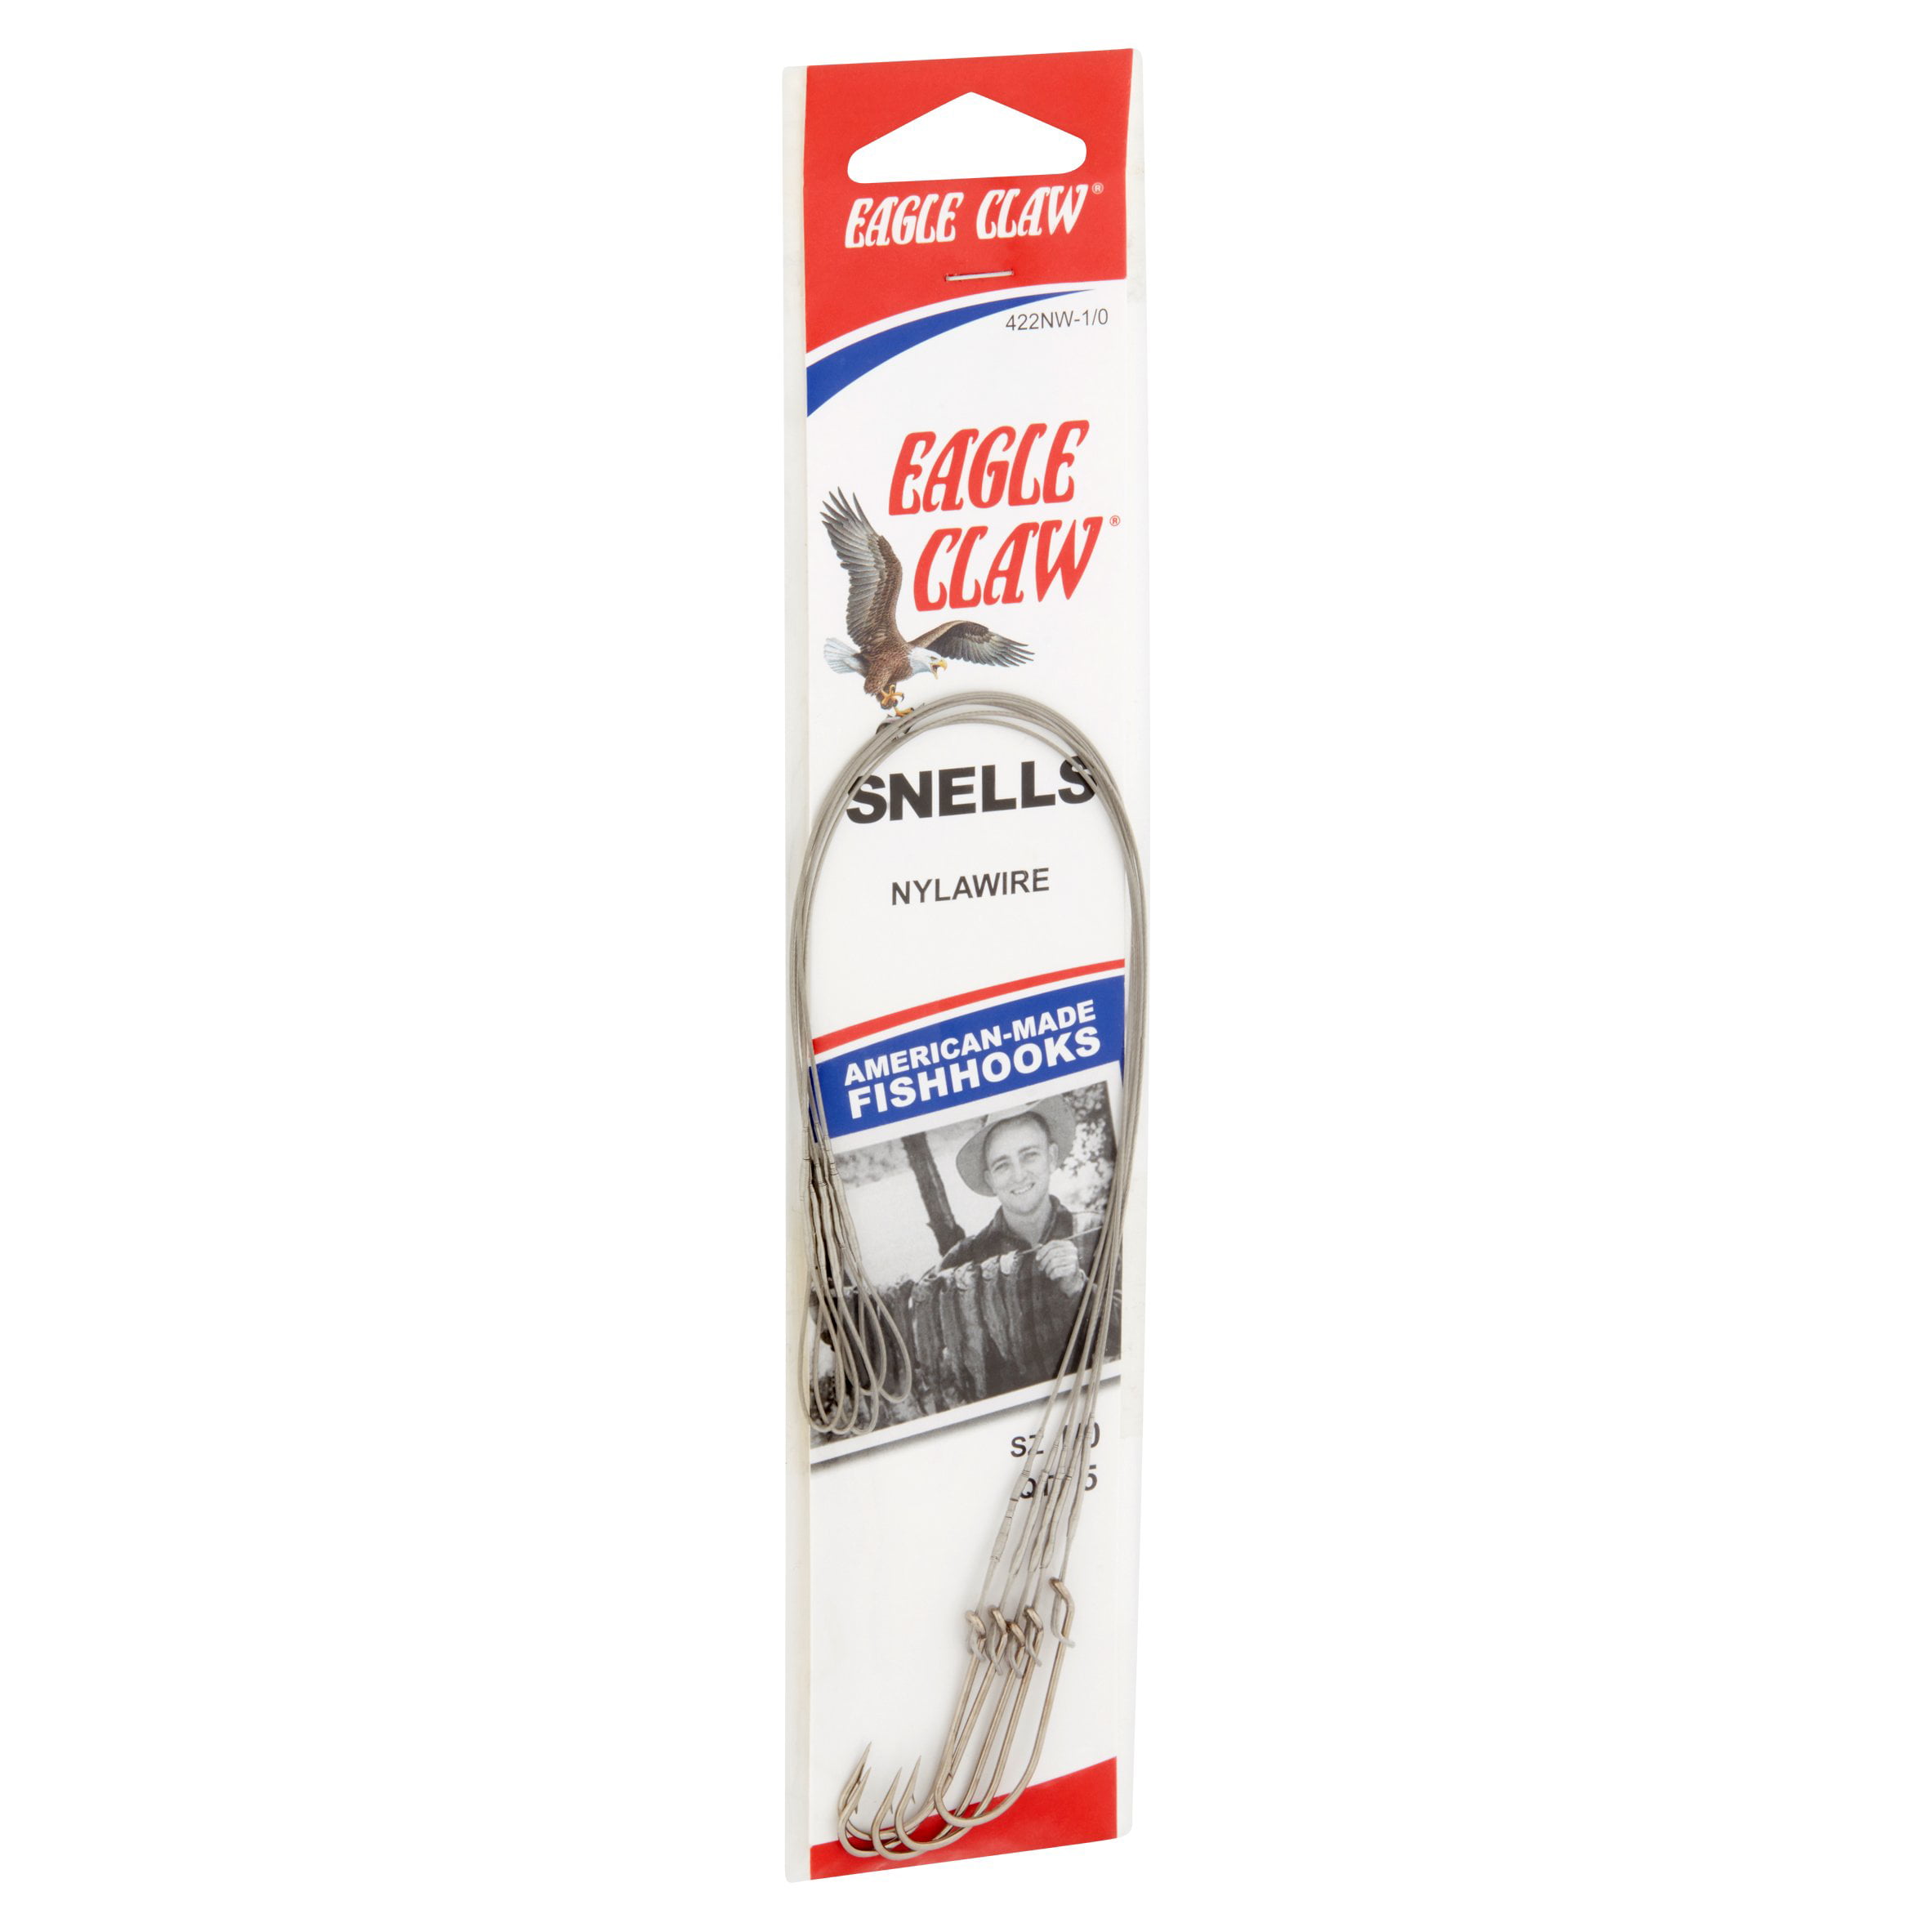 Eagle Claw 422NWH-3/0 Snells Nylawire Size 3/0 Fishhooks 